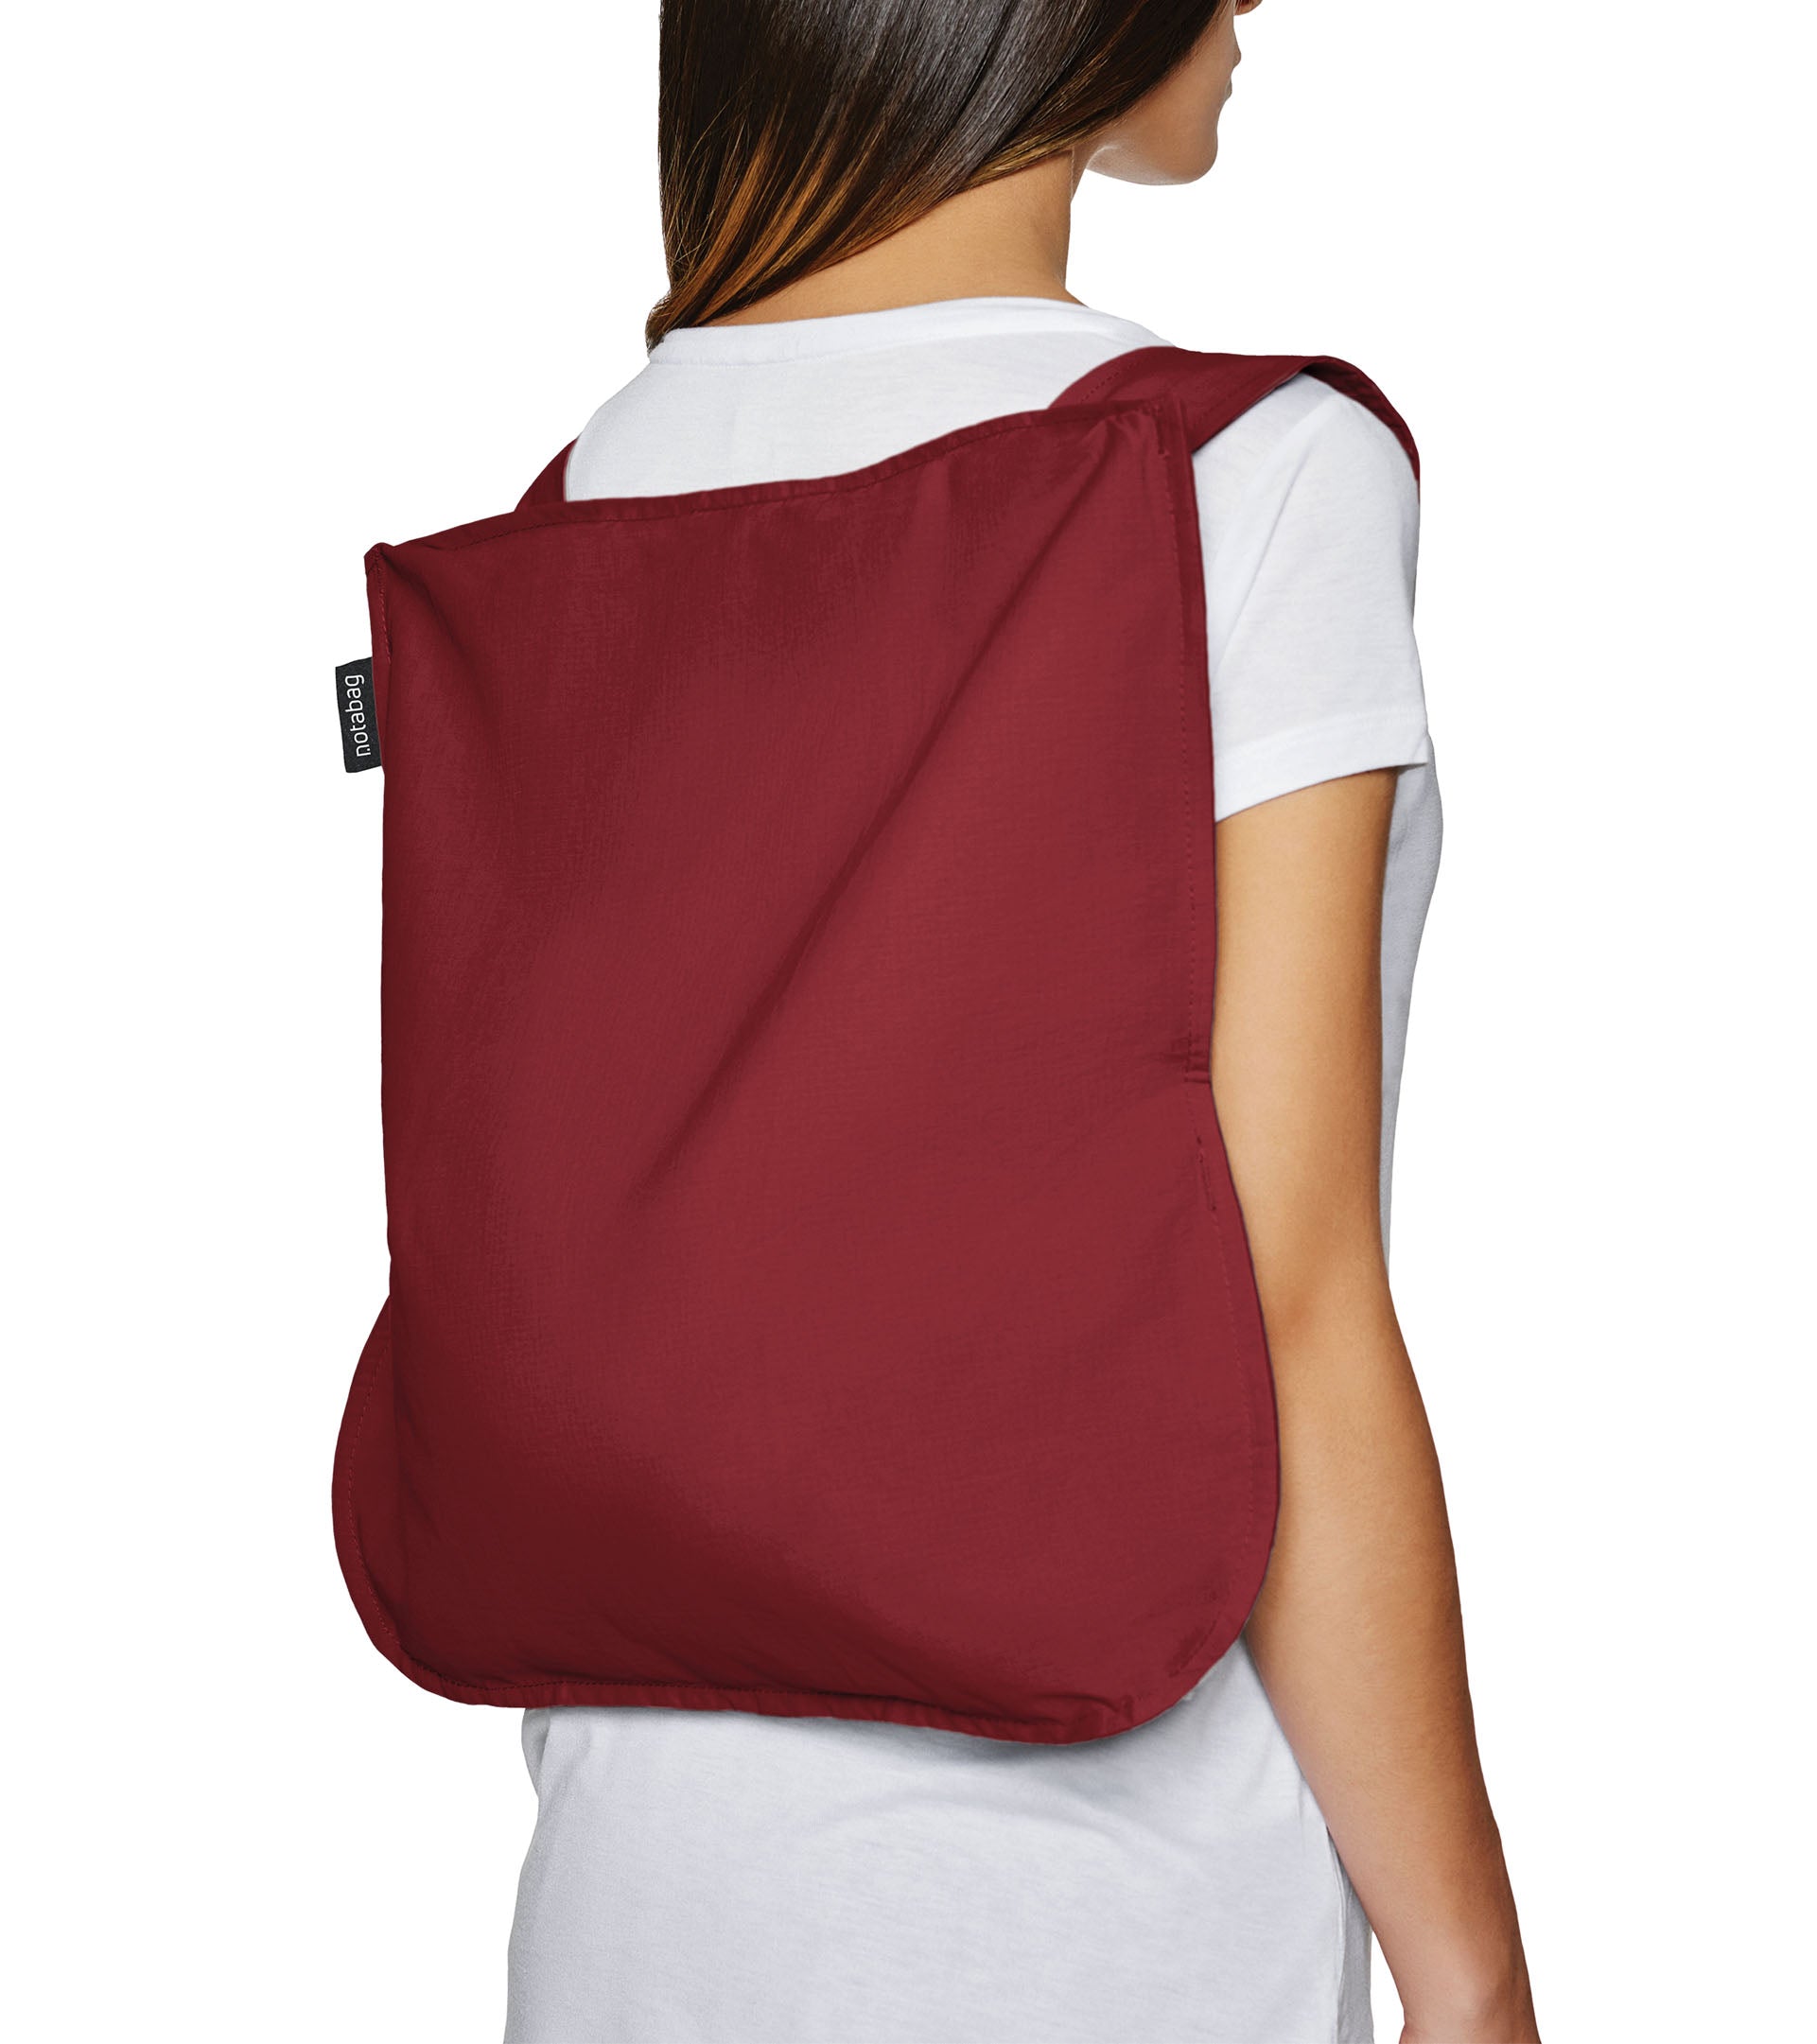 Notabag Foldable reusable backpack/tote in Wine red unfolded to backpack and on a models back